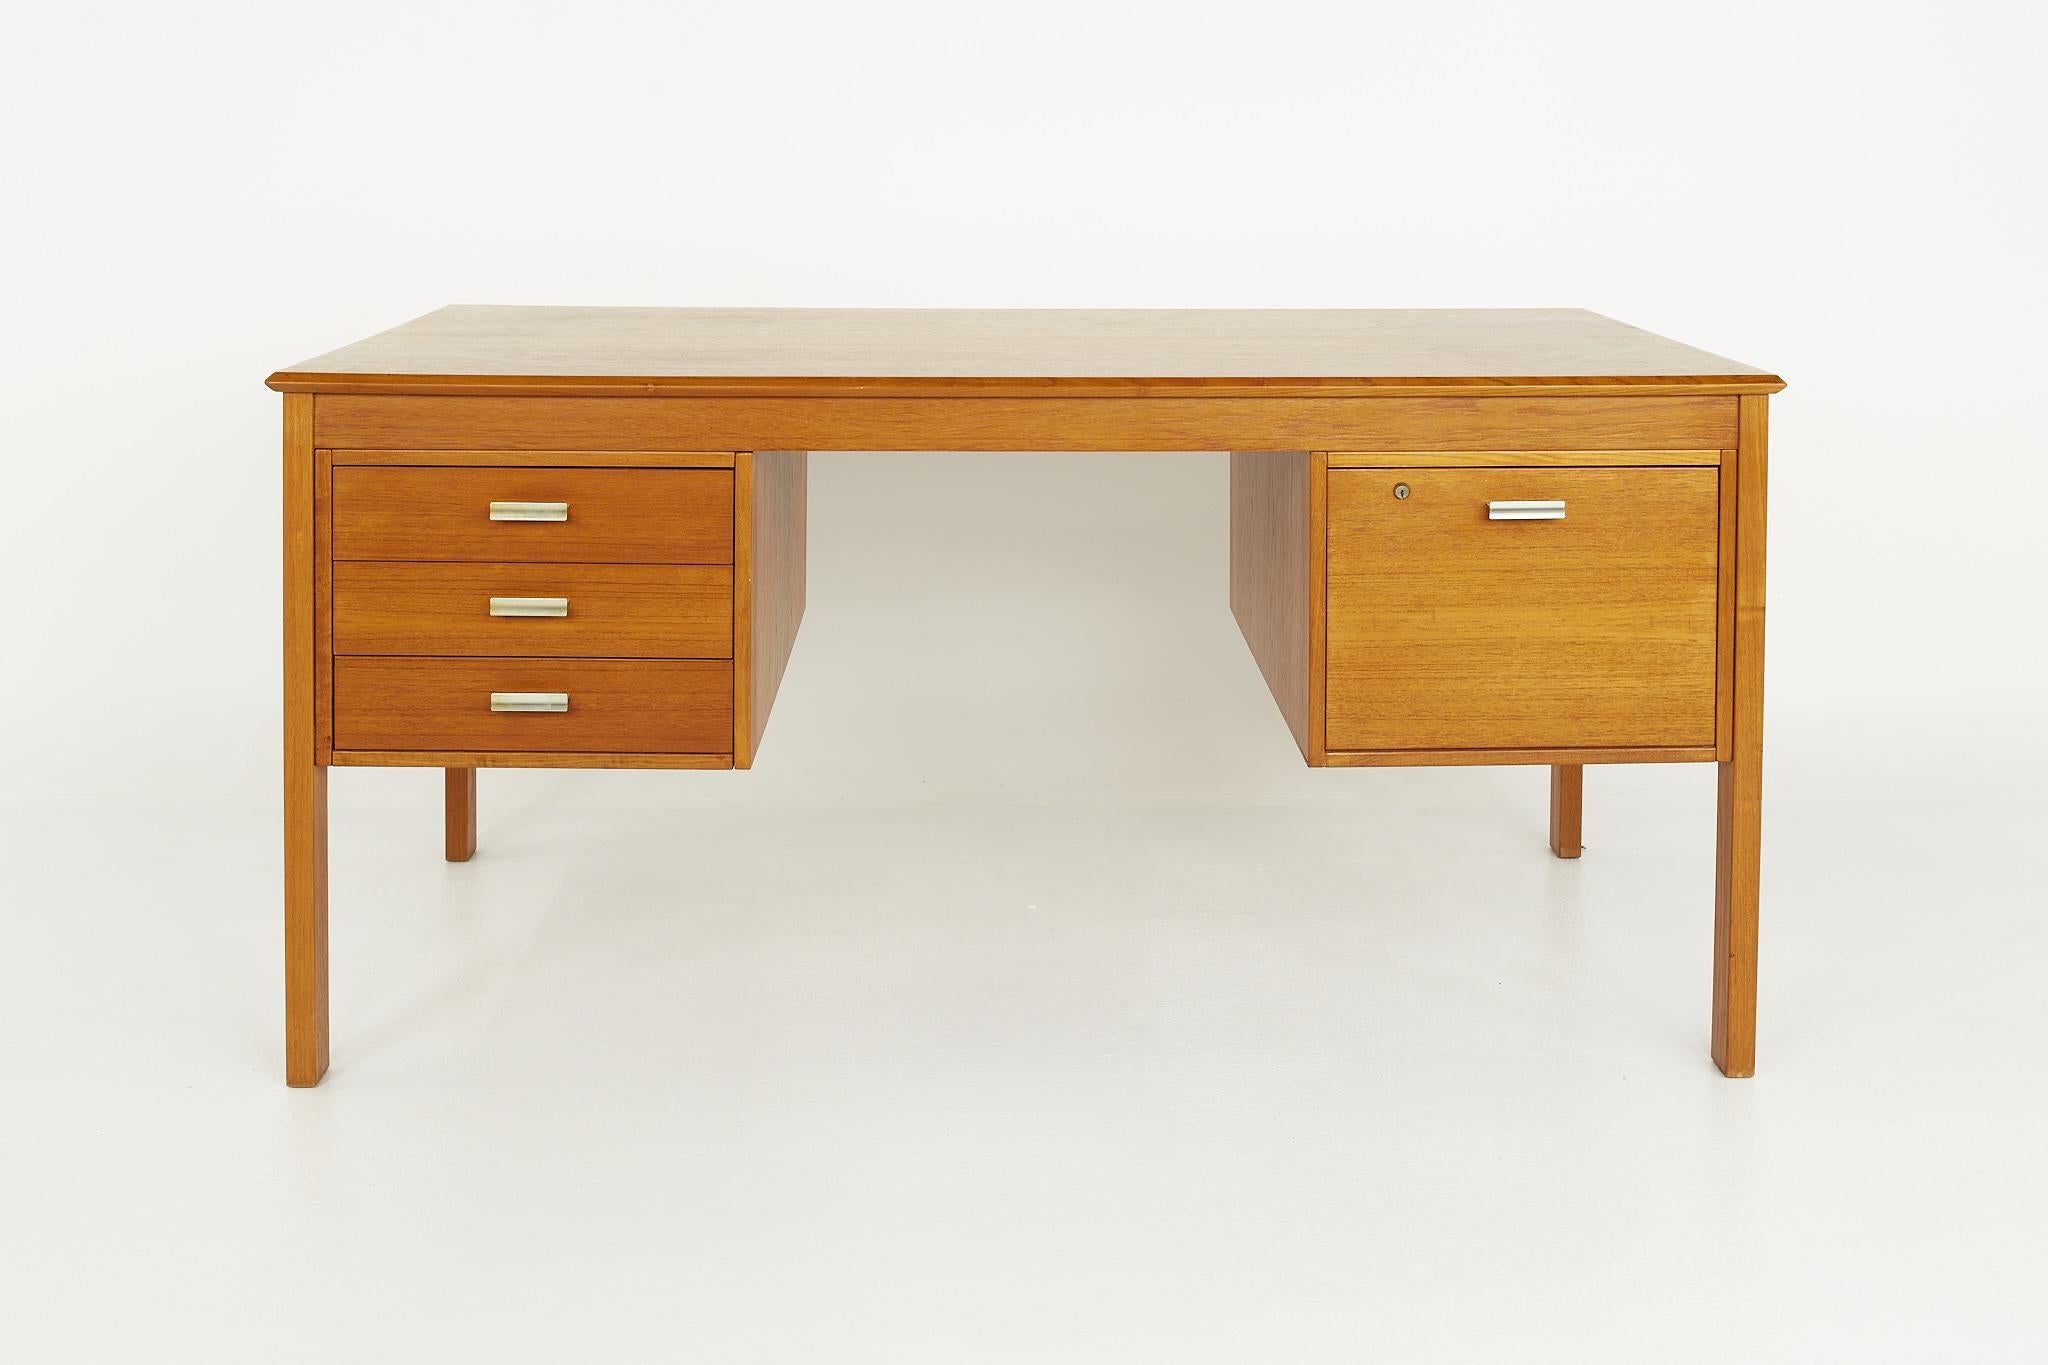 Farso Stolefabrik for Maurice Villency mid century Danish teak desk

This desk measures: 59 wide x 31.5 deep x 28.5 inches high, with a chair clearance of 26 inches

?All pieces of furniture can be had in what we call restored vintage condition.